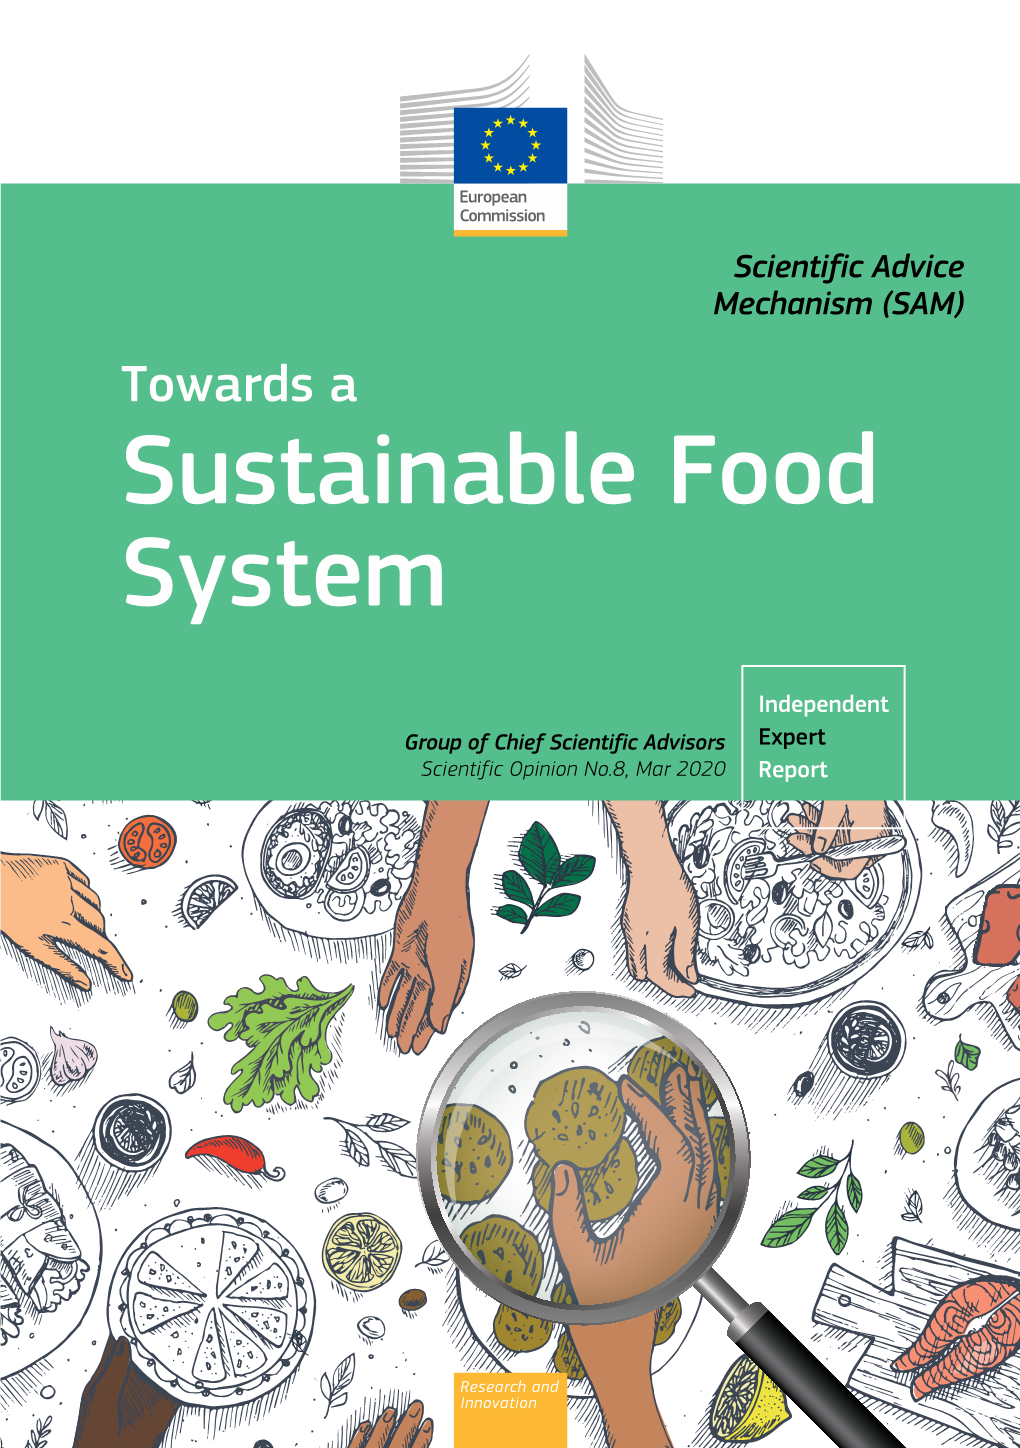 Towards a Sustainable Food System